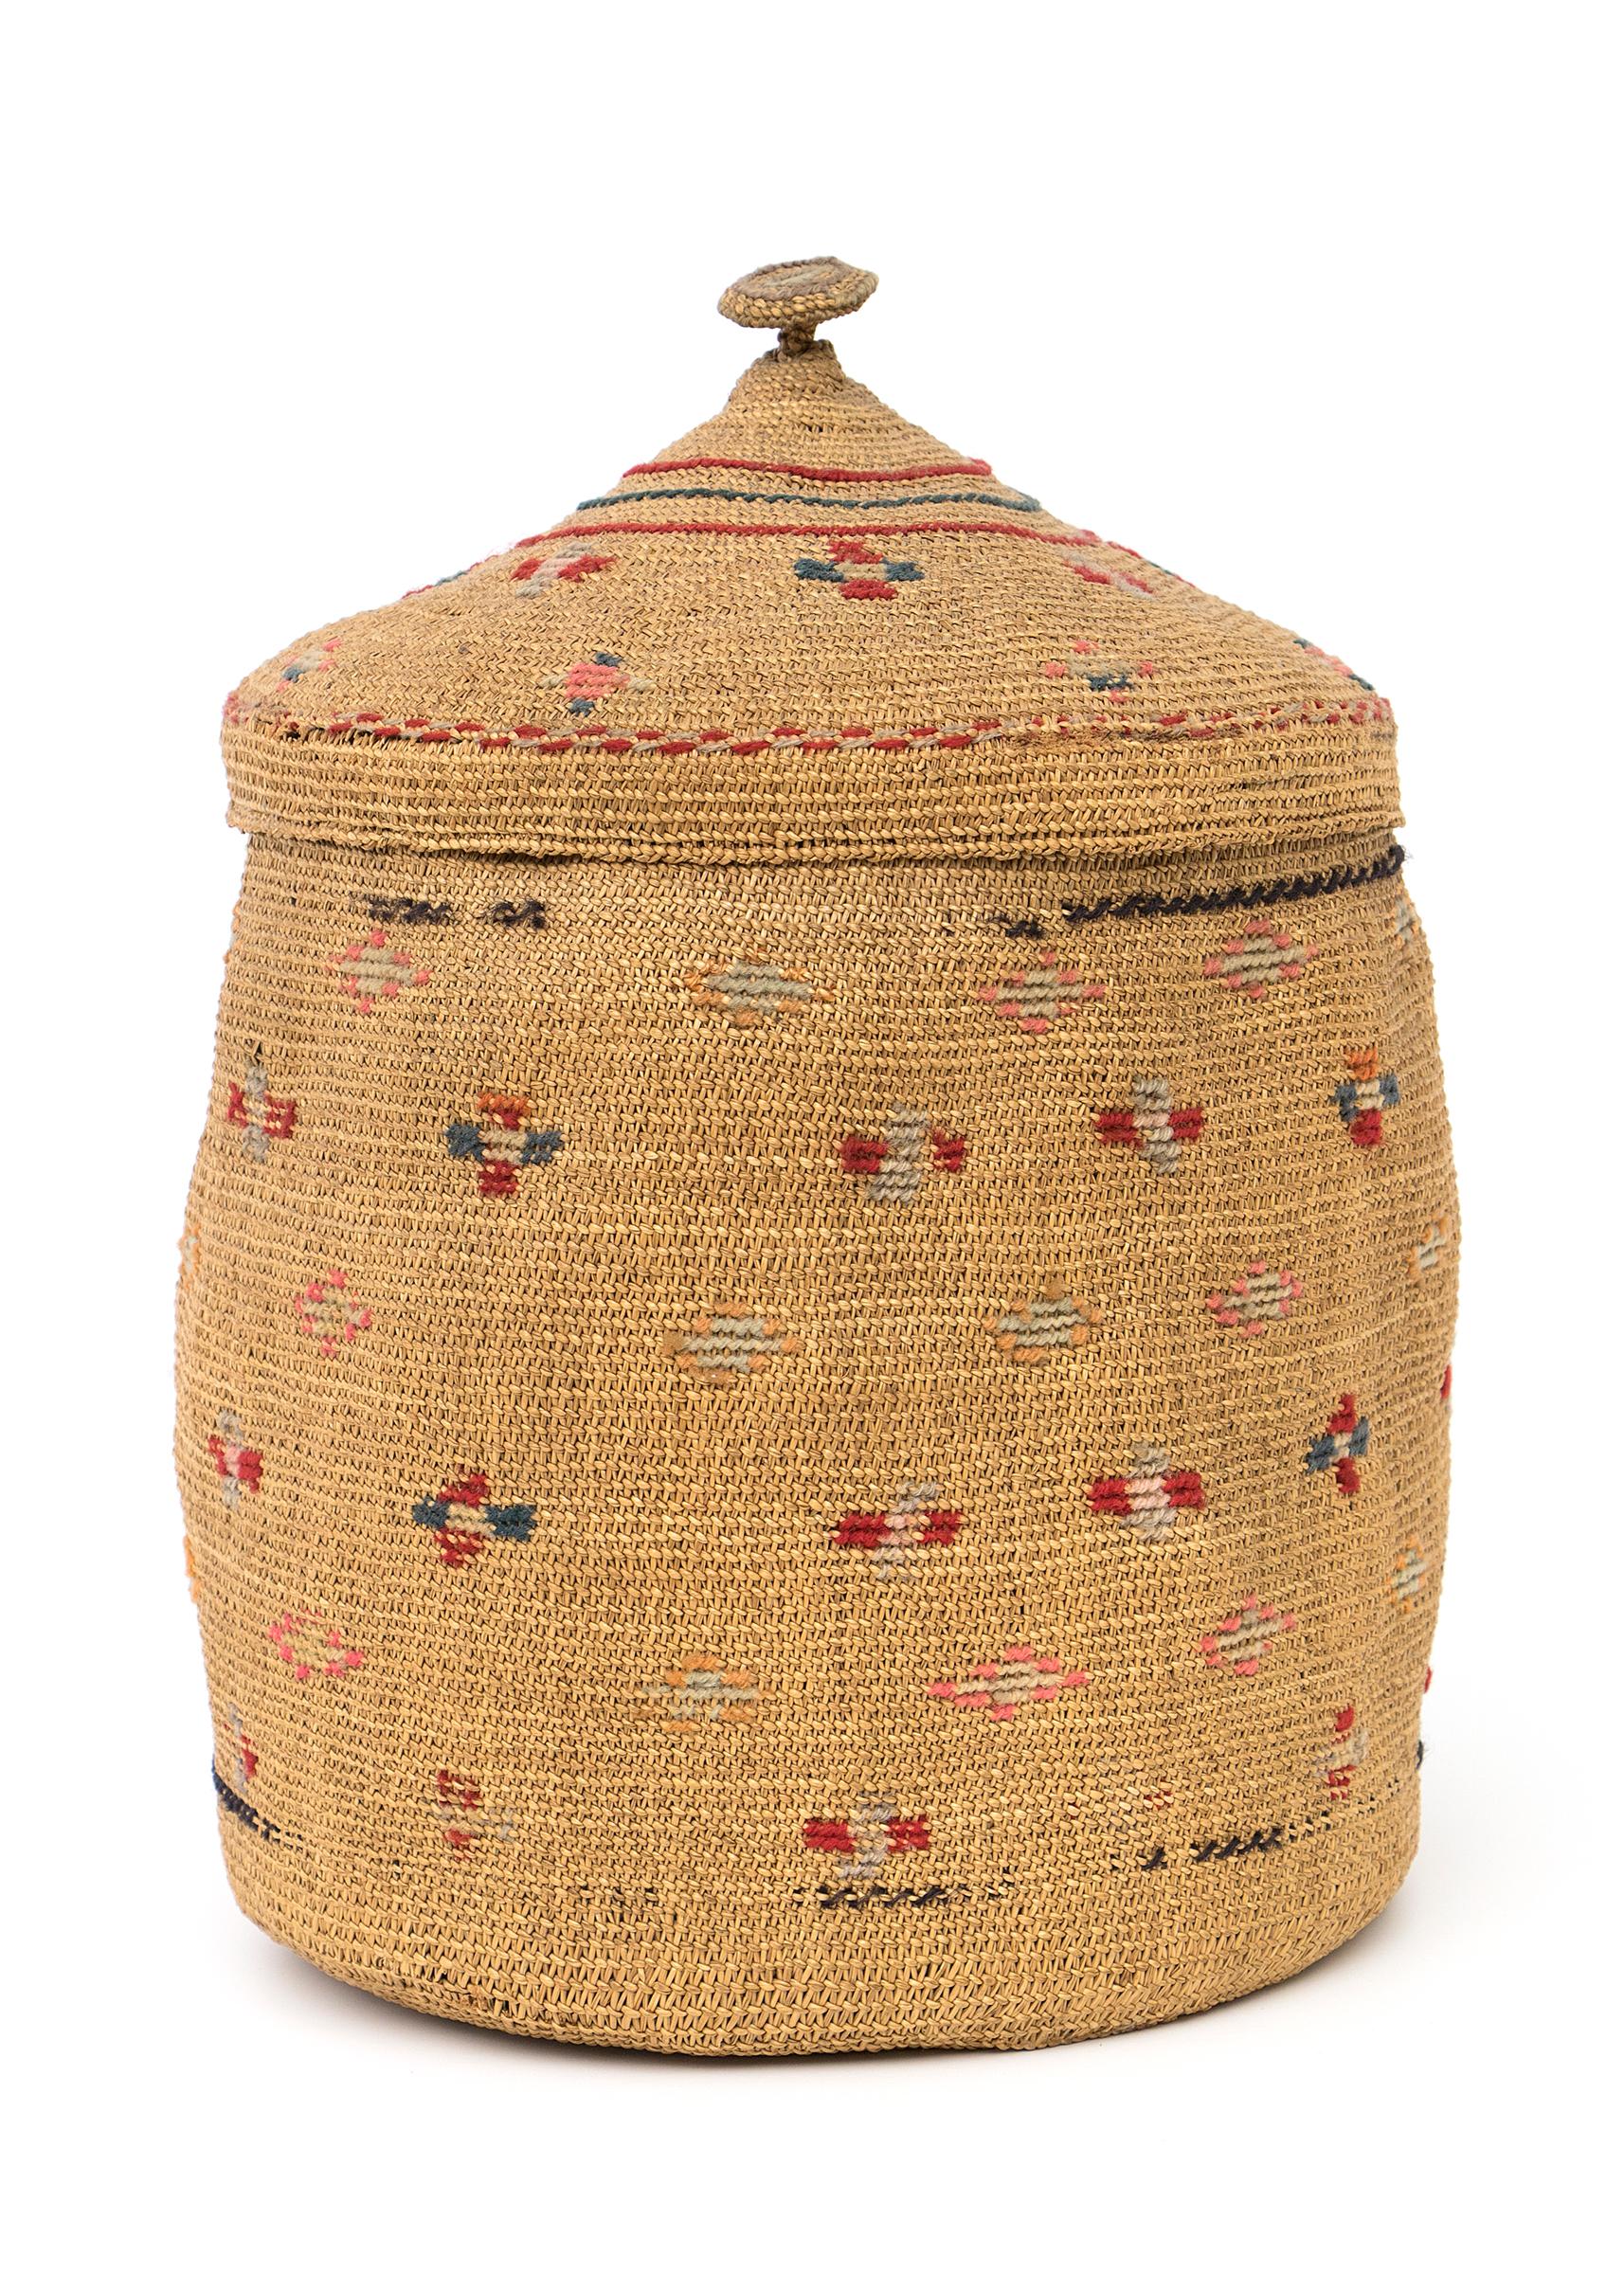 Native American Northwest Coast 1900 Woven Basket with Top, Multicolor Cross Patterns, Table Top For Sale